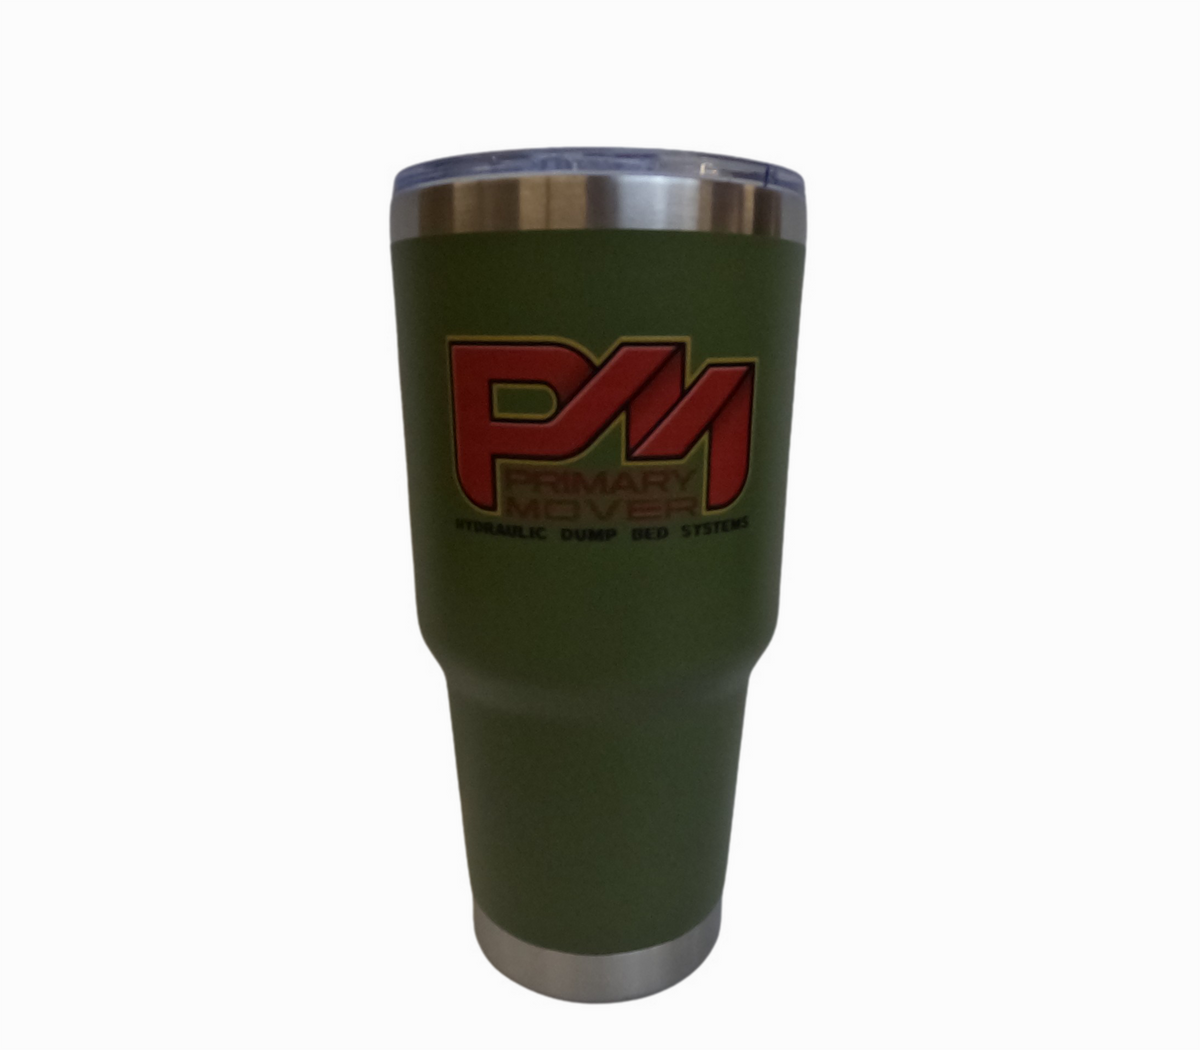 Sleek 30oz Travel Mug with Primary Mover logo, stainless steel construction, leak-resistant lid, and versatile use. Ideal for on-the-go drinks.